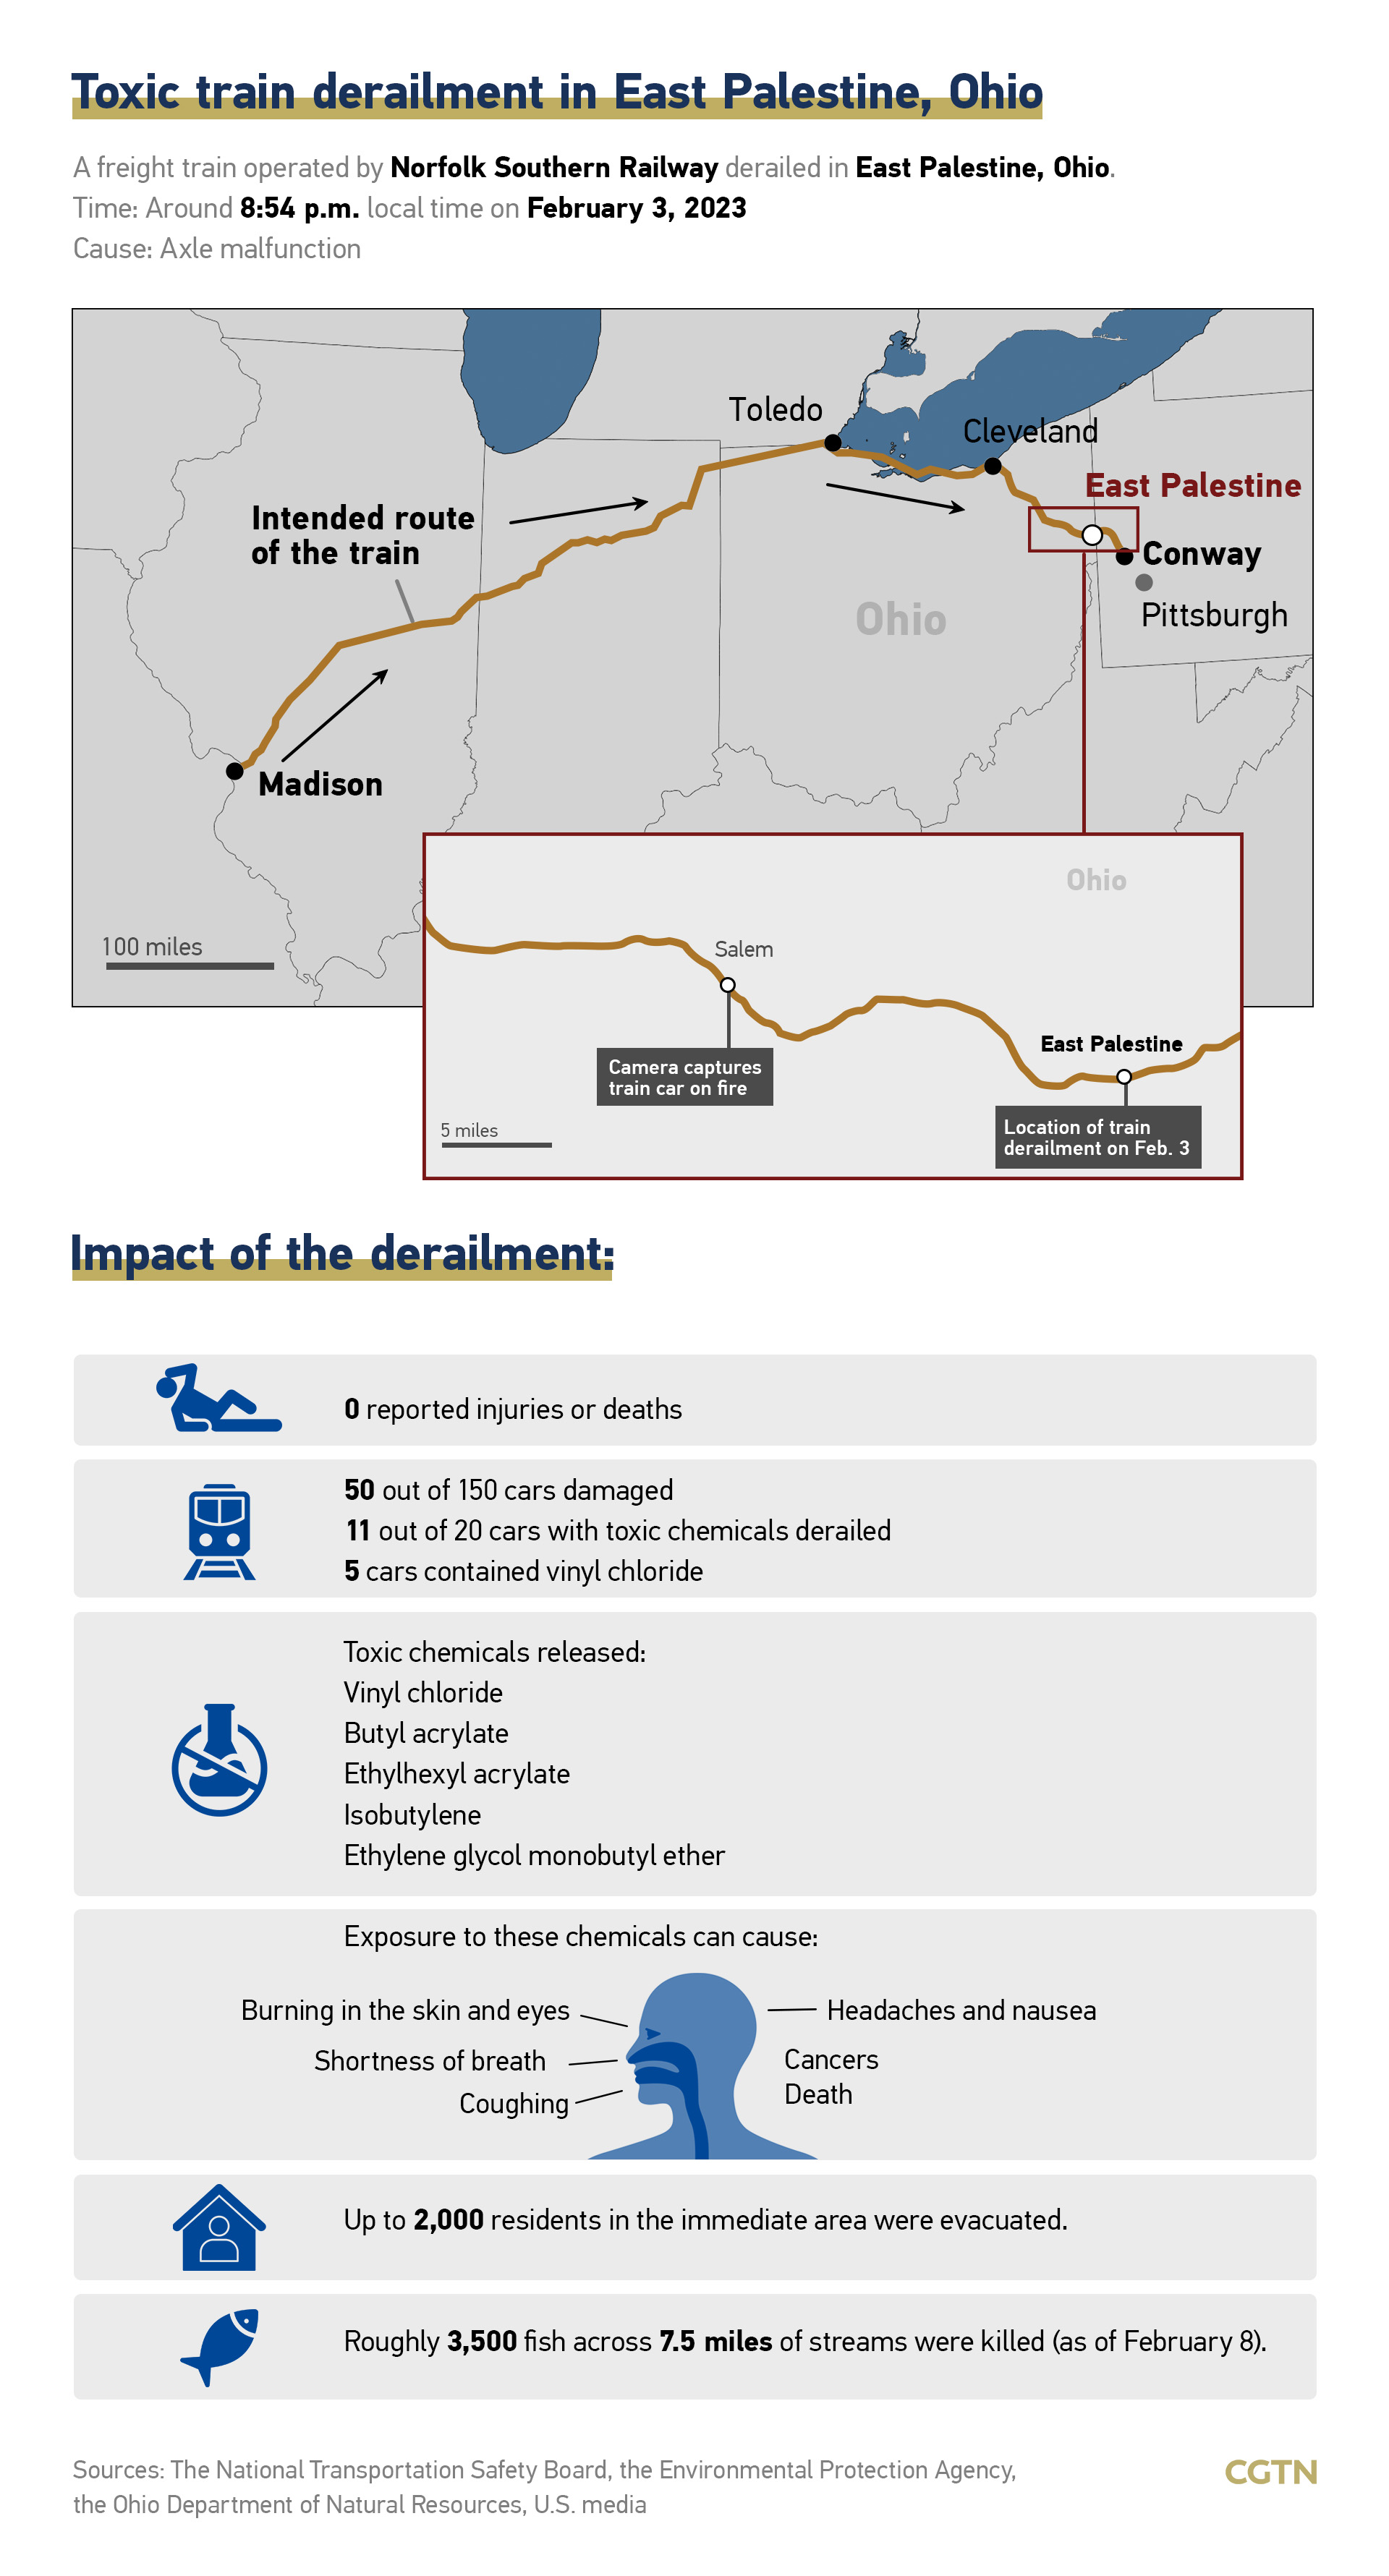 Chart of the Day: Key things to know about the toxic train derailment in Ohio